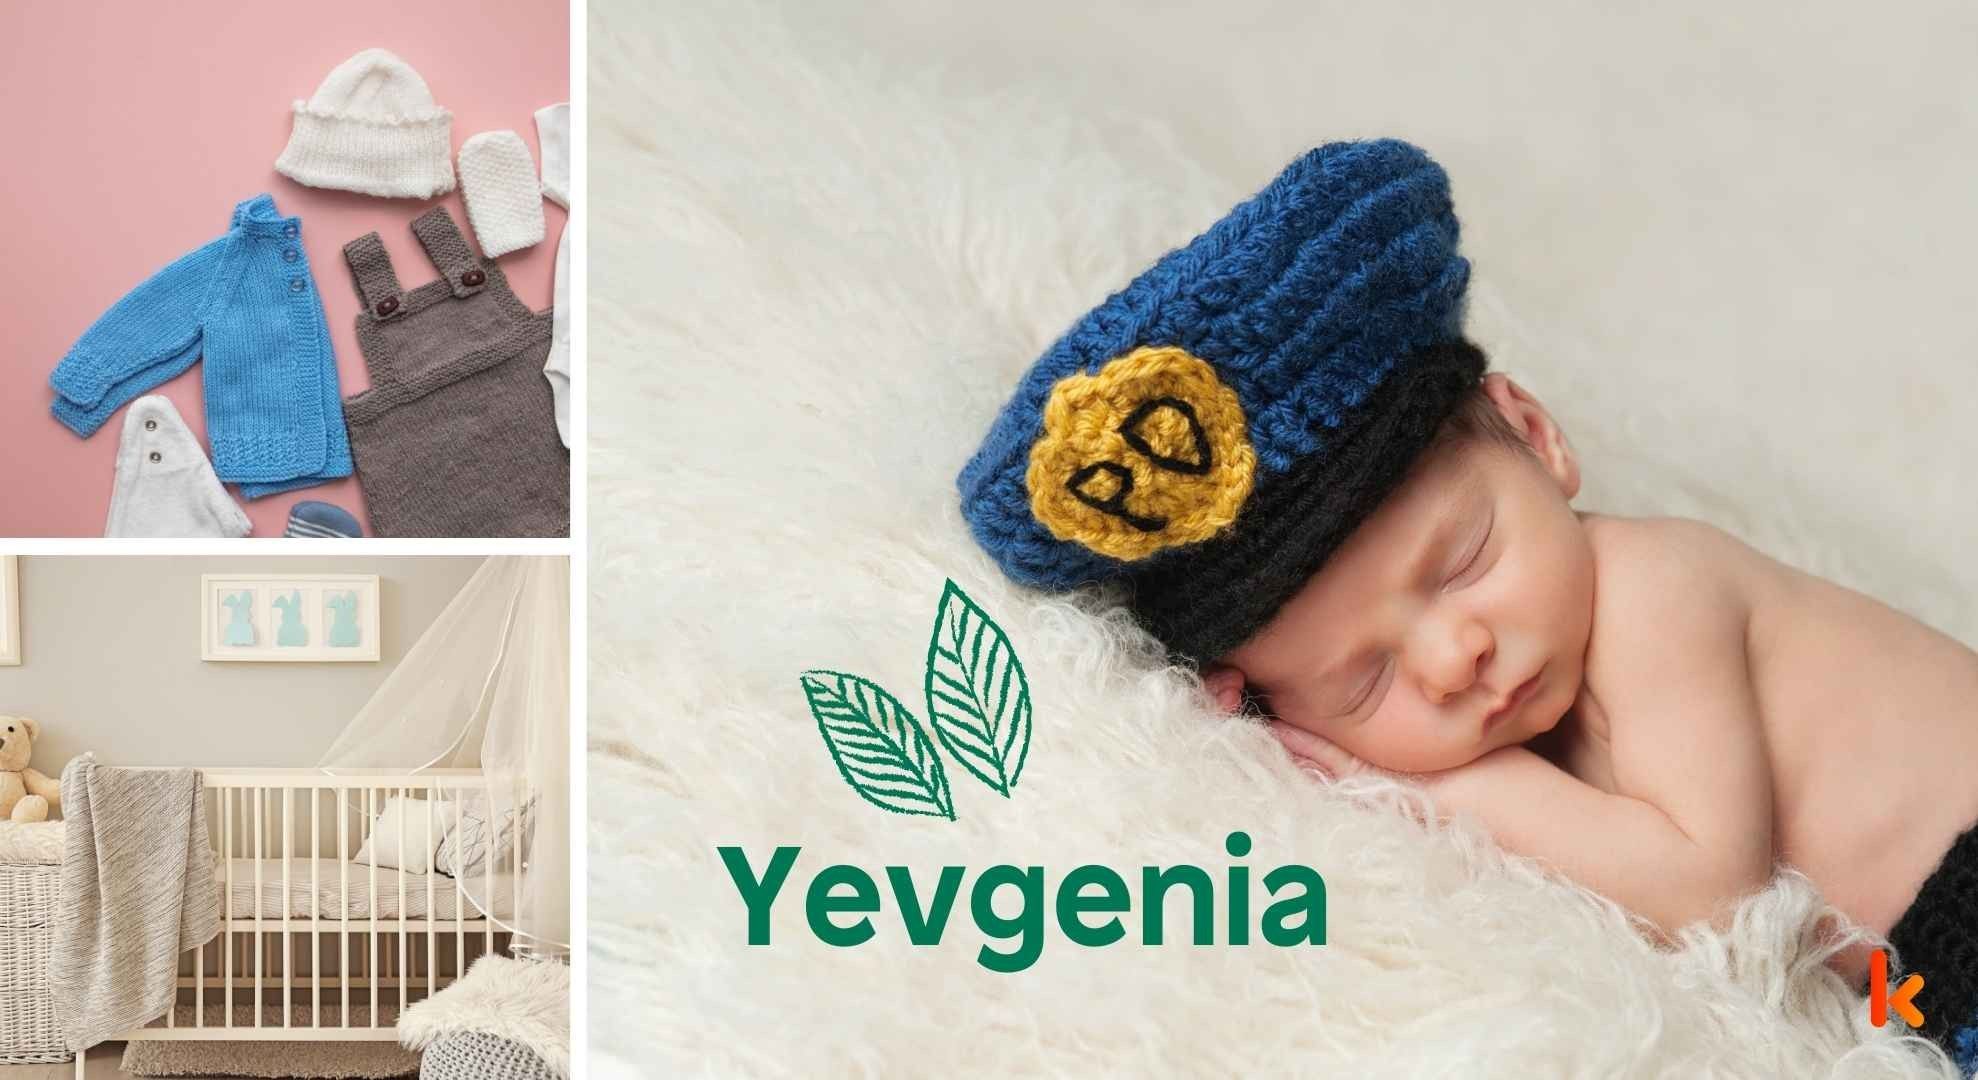 Meaning of the name Yevgenia